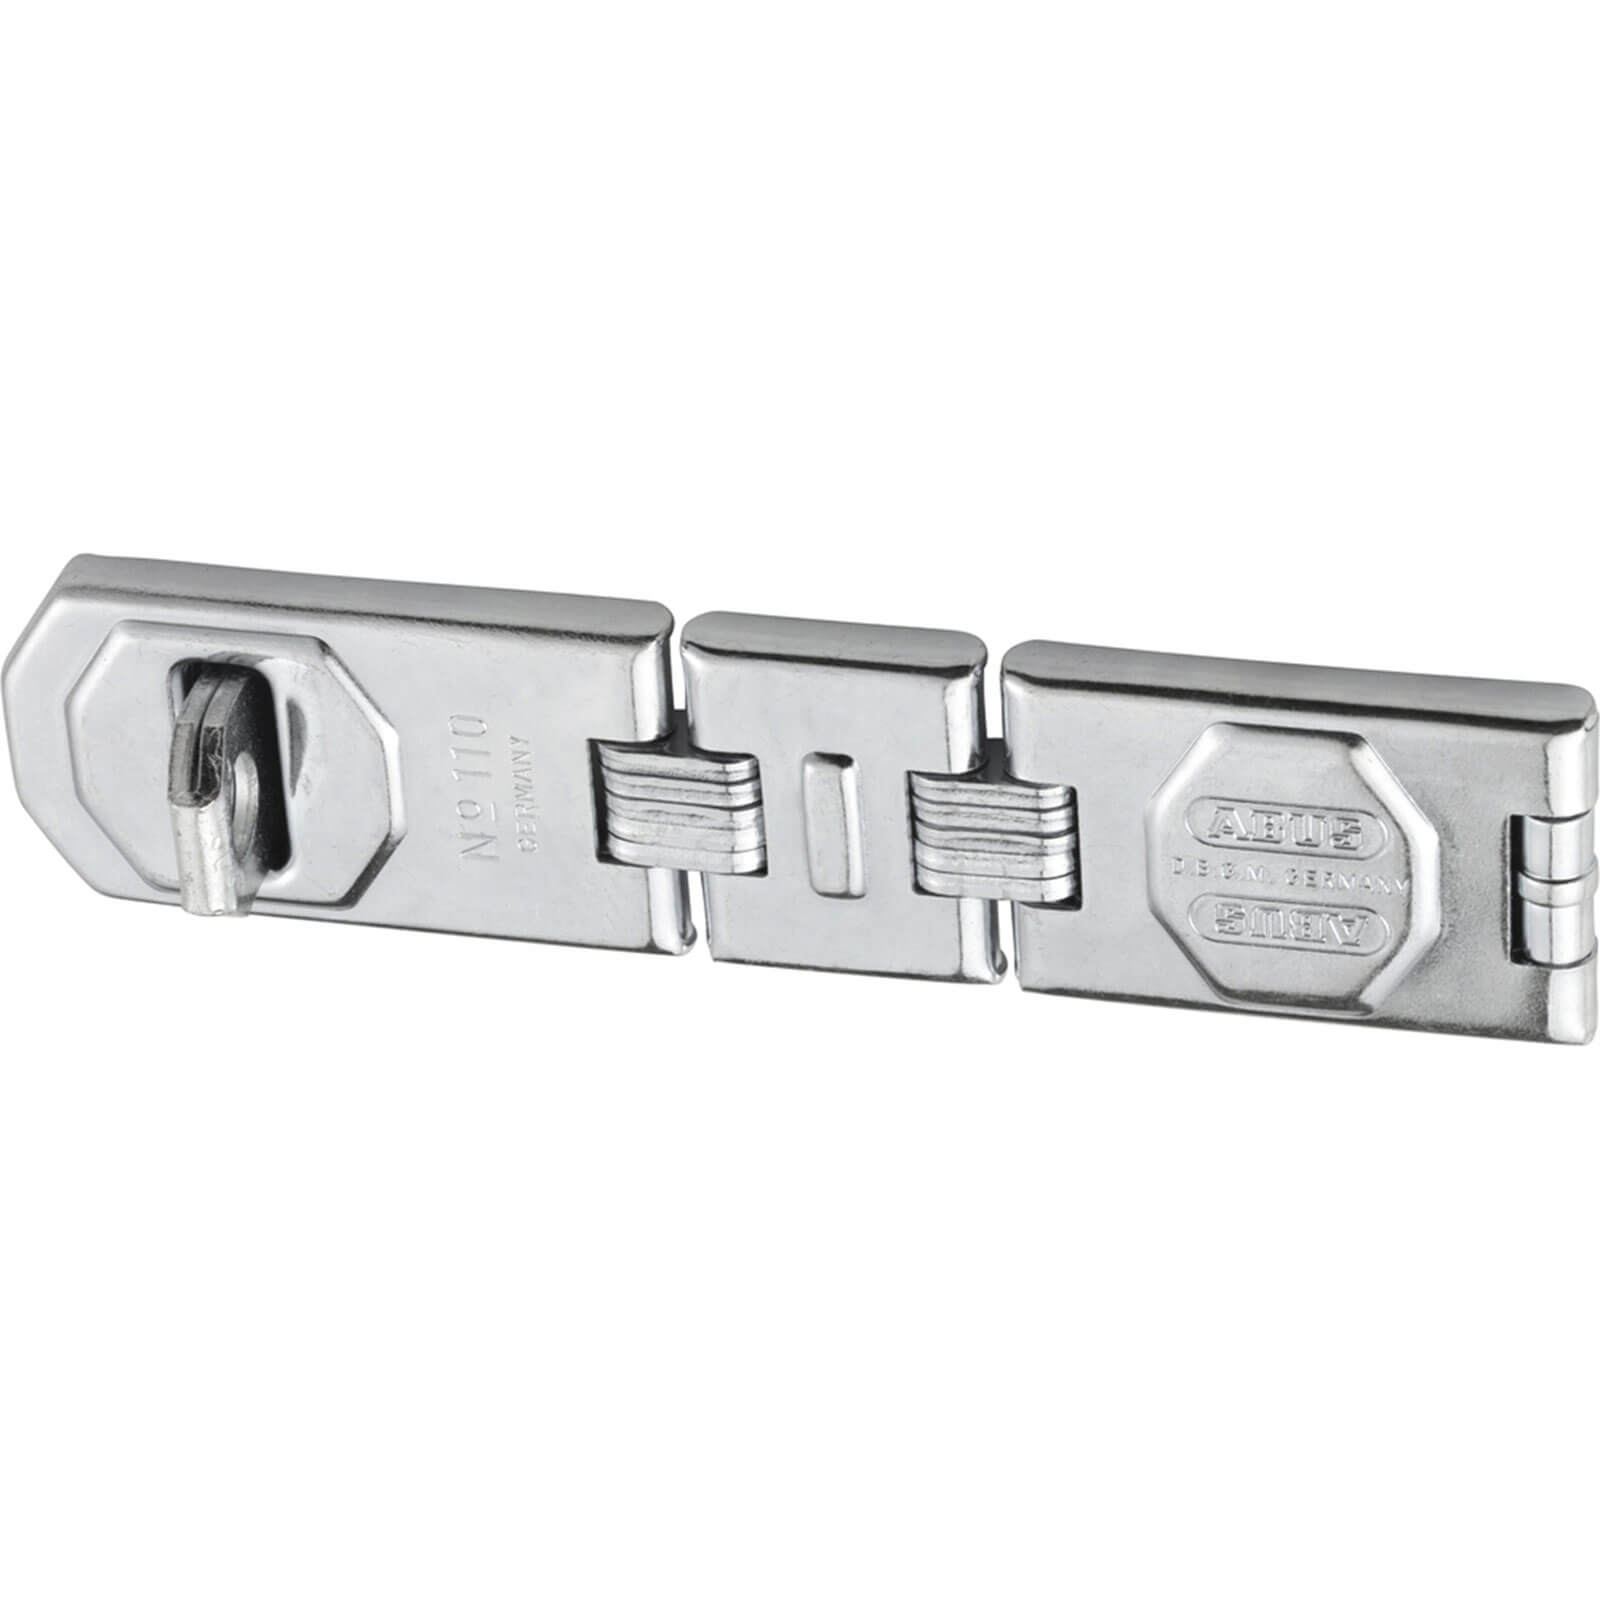 Image of Abus 110 Series Universal Hasp and Staple 195mm Double Jointed